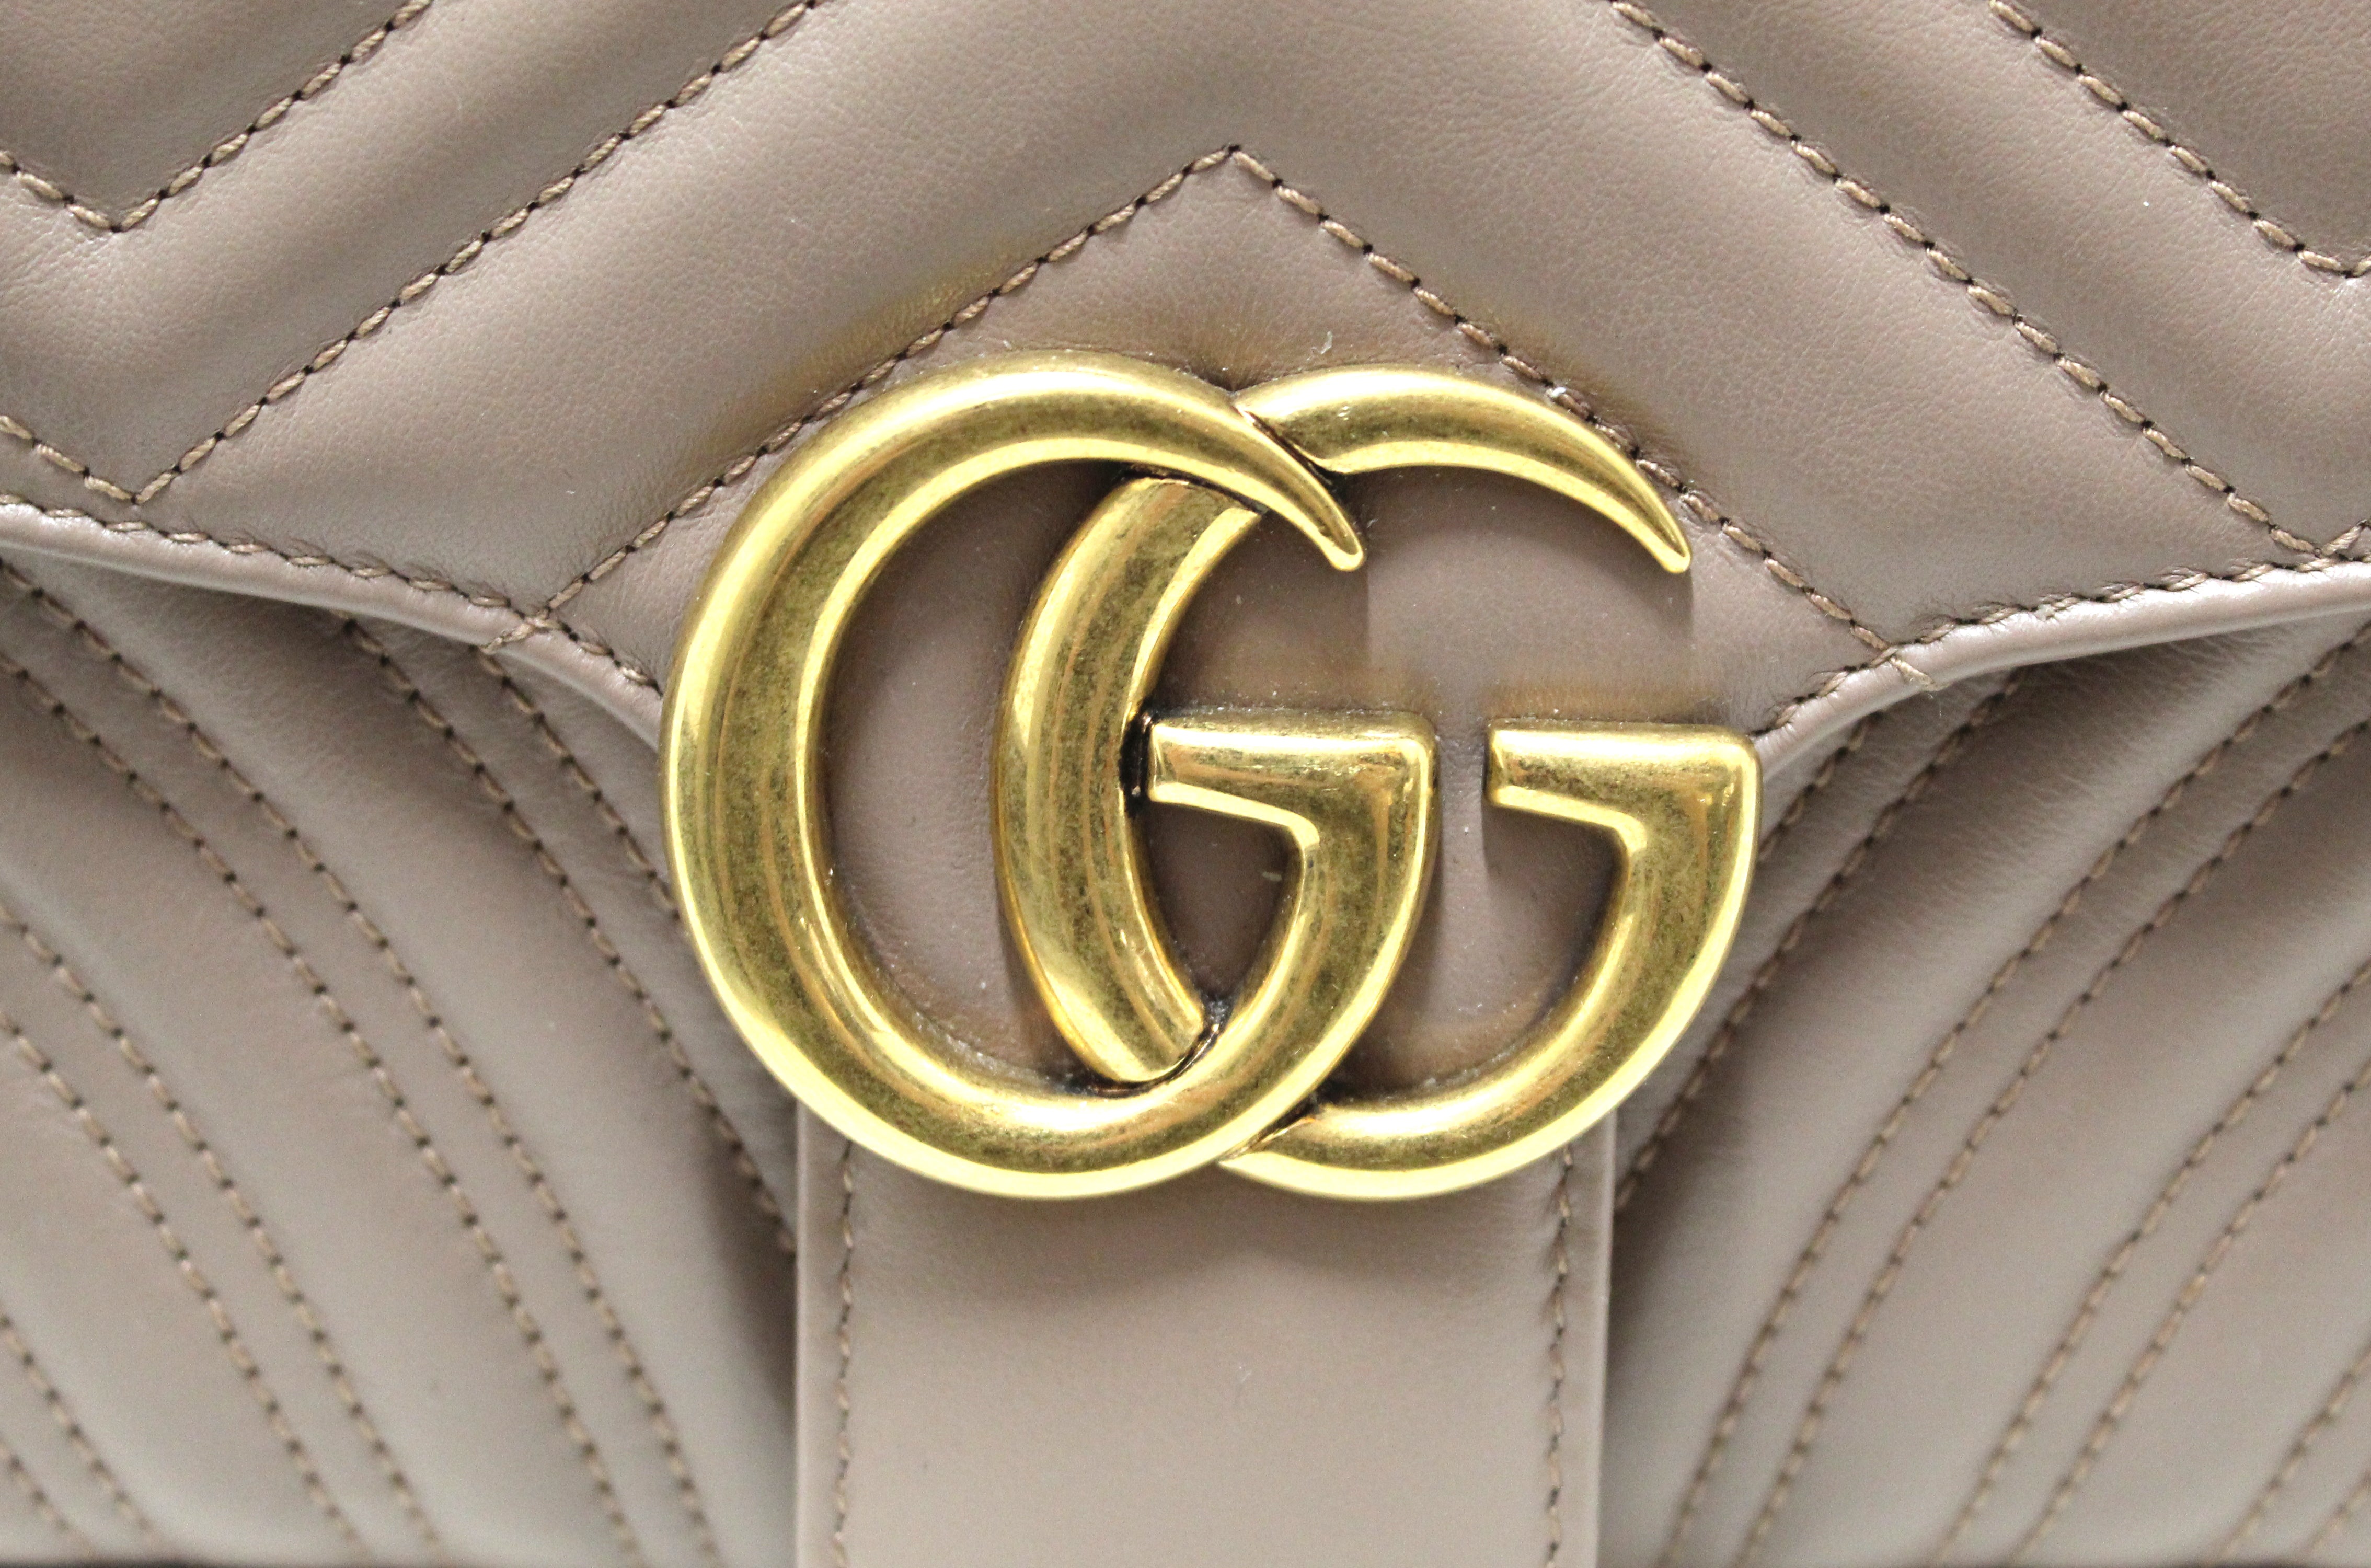 HOW TO SPOT REAL GUCCI MARMONT FROM FAKE GUCCI? Gucci Marmont bag review! 